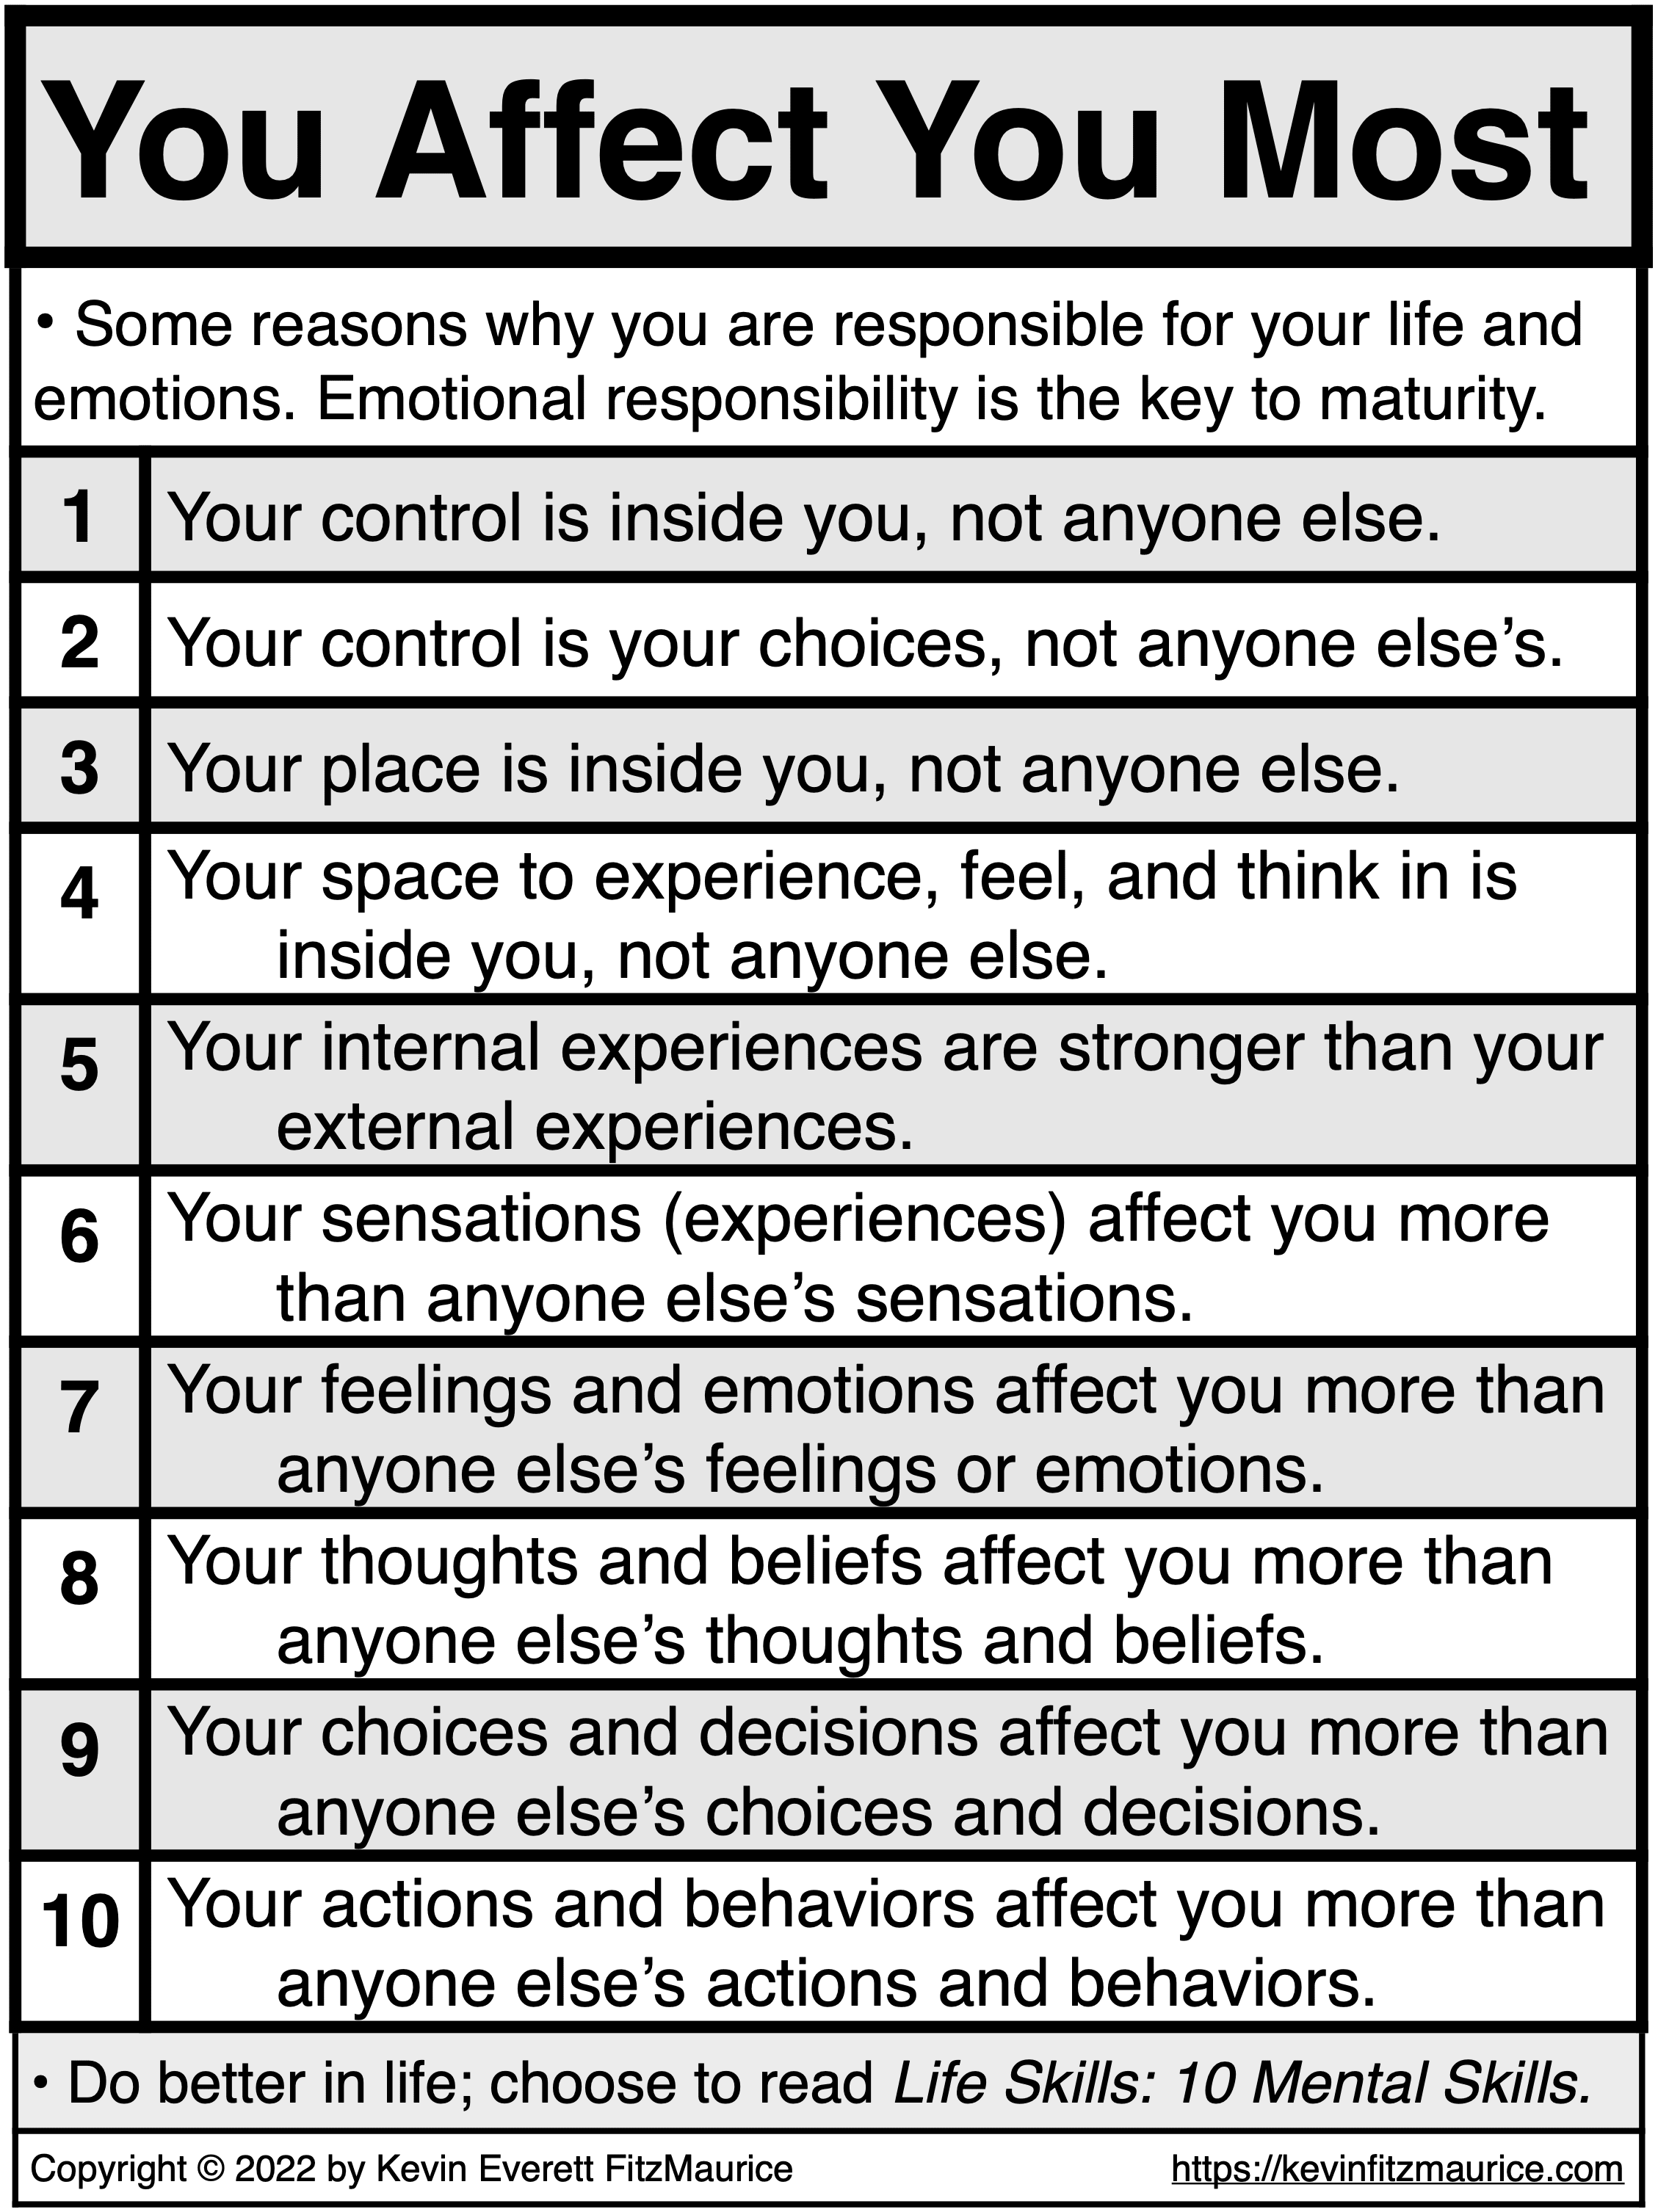 Your Self-Talk Affects You the Most